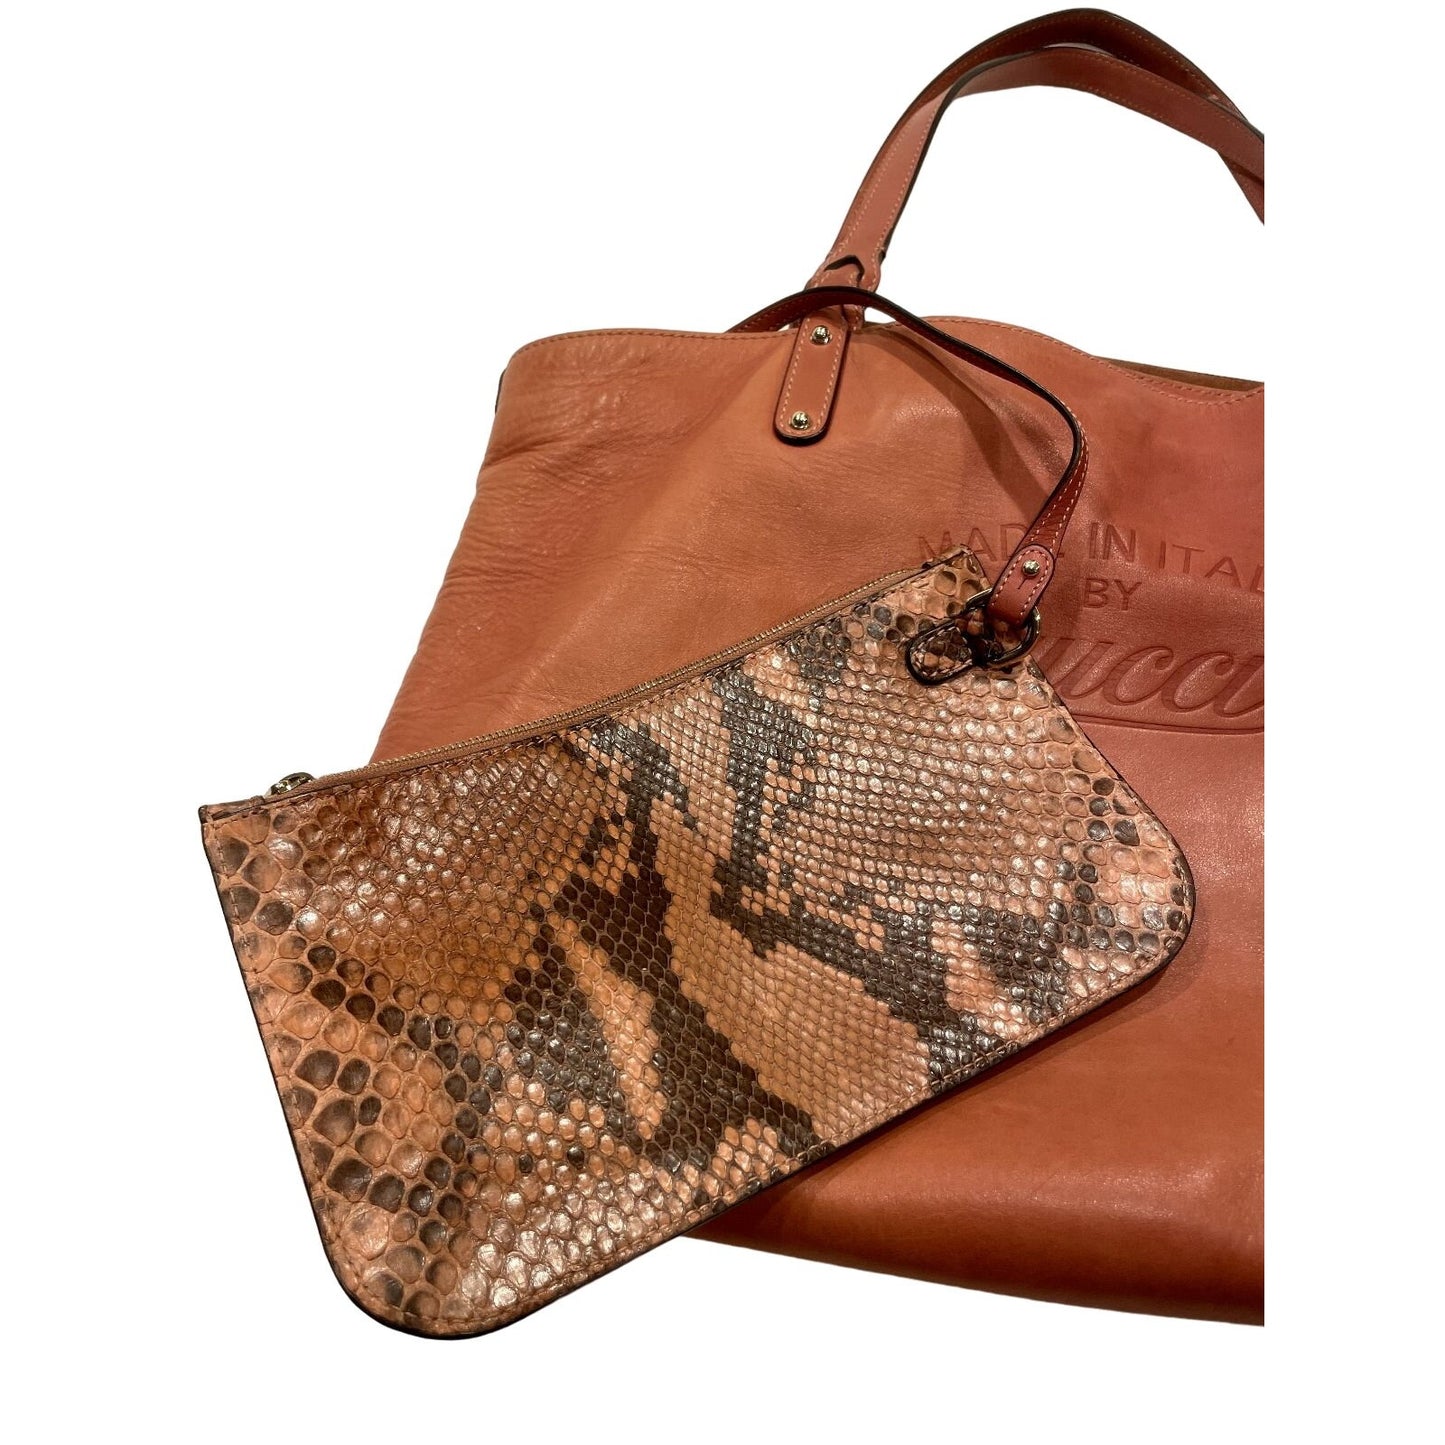 Gucci caramel leather craft XL tote with a python wallet, braided handles, & 'Made in Italy by Gucci' embossed on the front